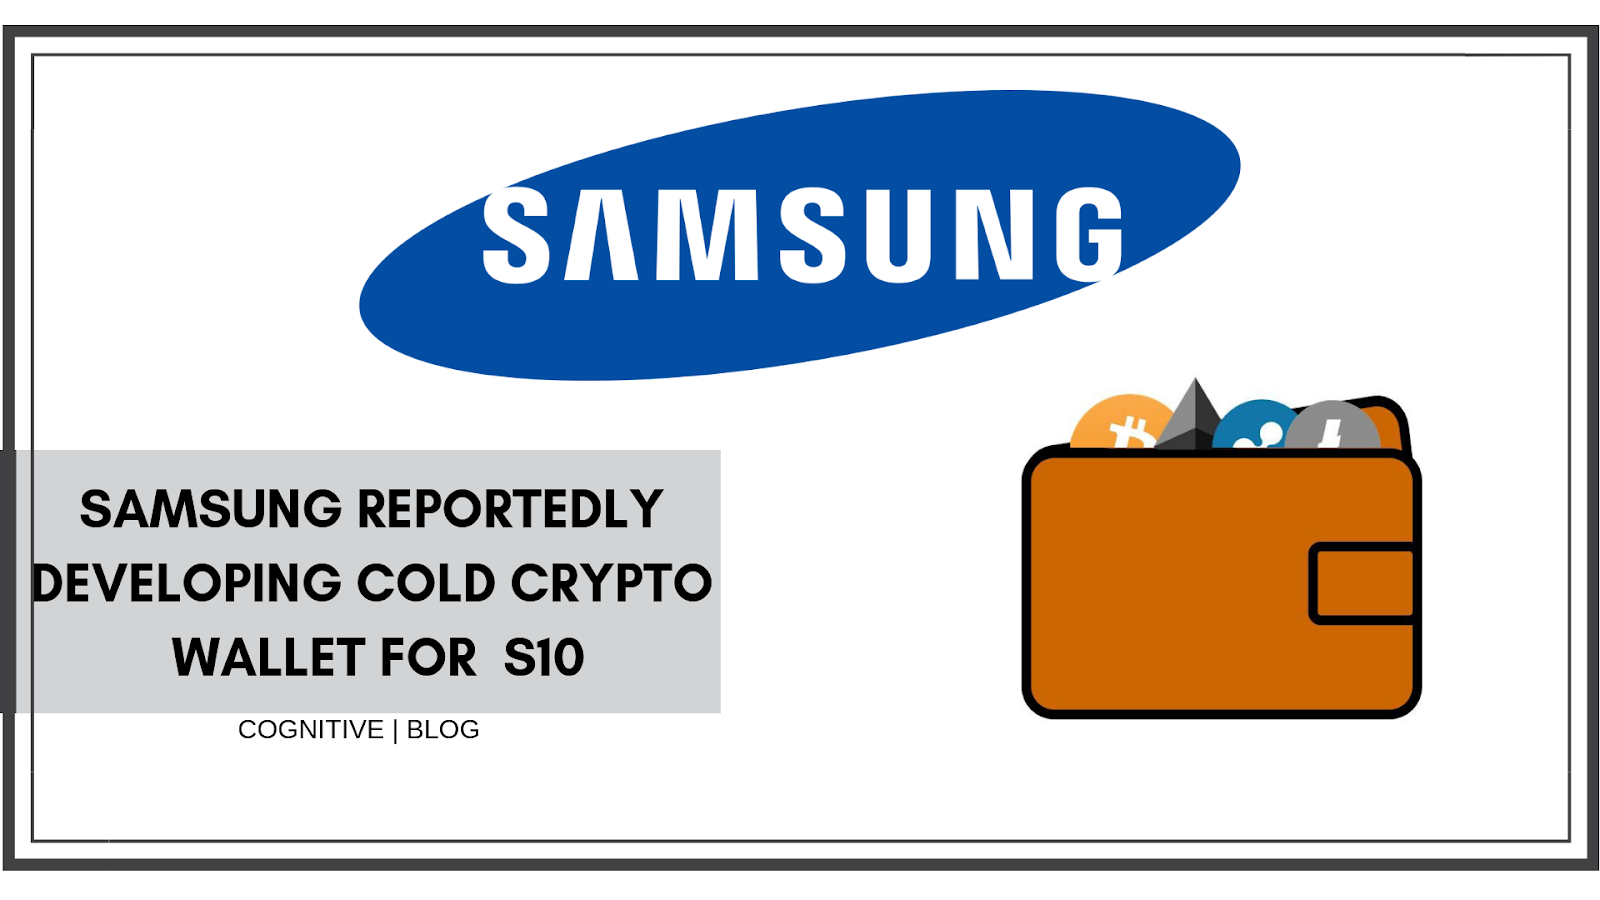 cryptocurrency news: SAMSUNG reportedly developing cold crypto wallet for S10